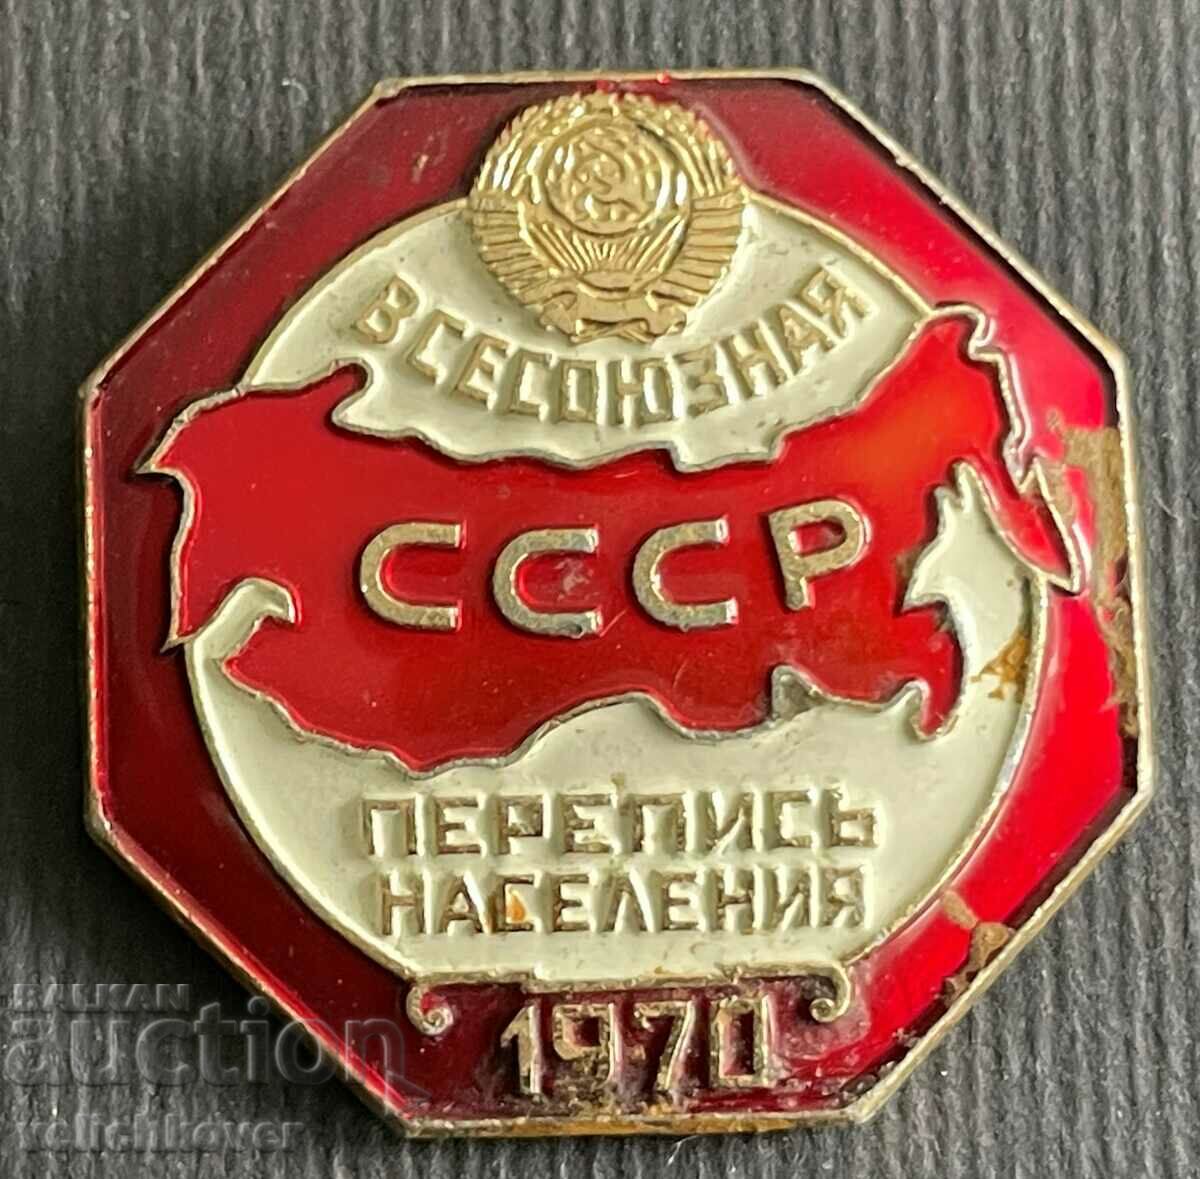 34721 USSR for participation in the 1970 population census.